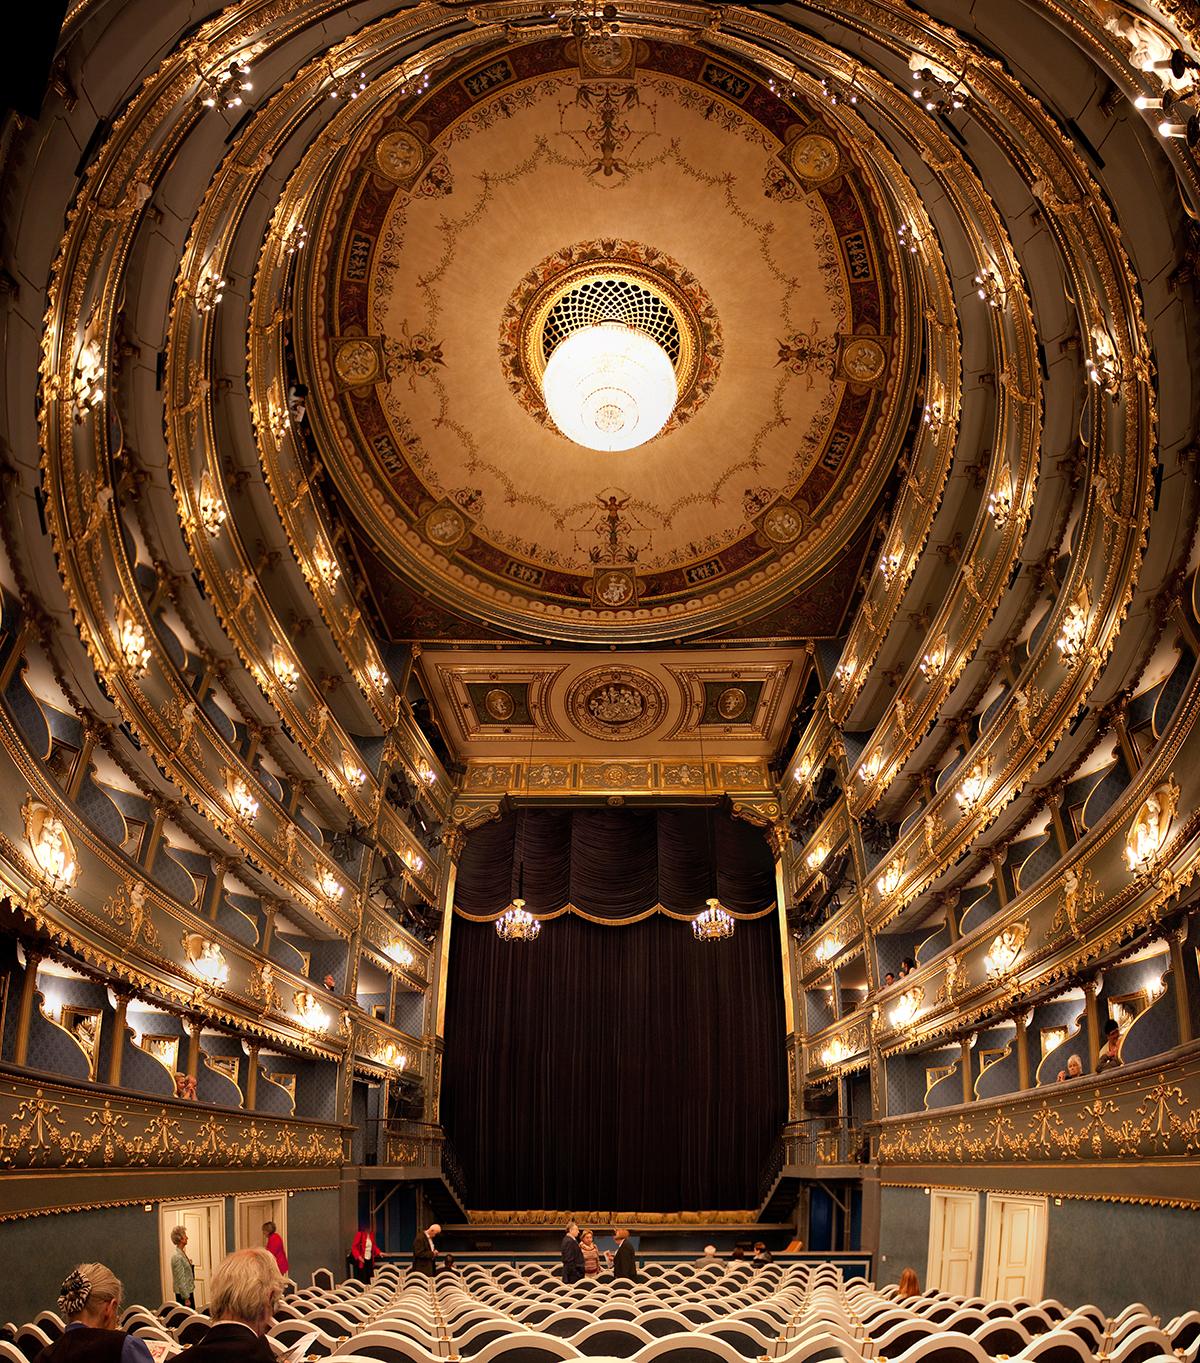 Inside the Estates Theatre, with its neoclassical features. (CC BY 3.0 DEED)